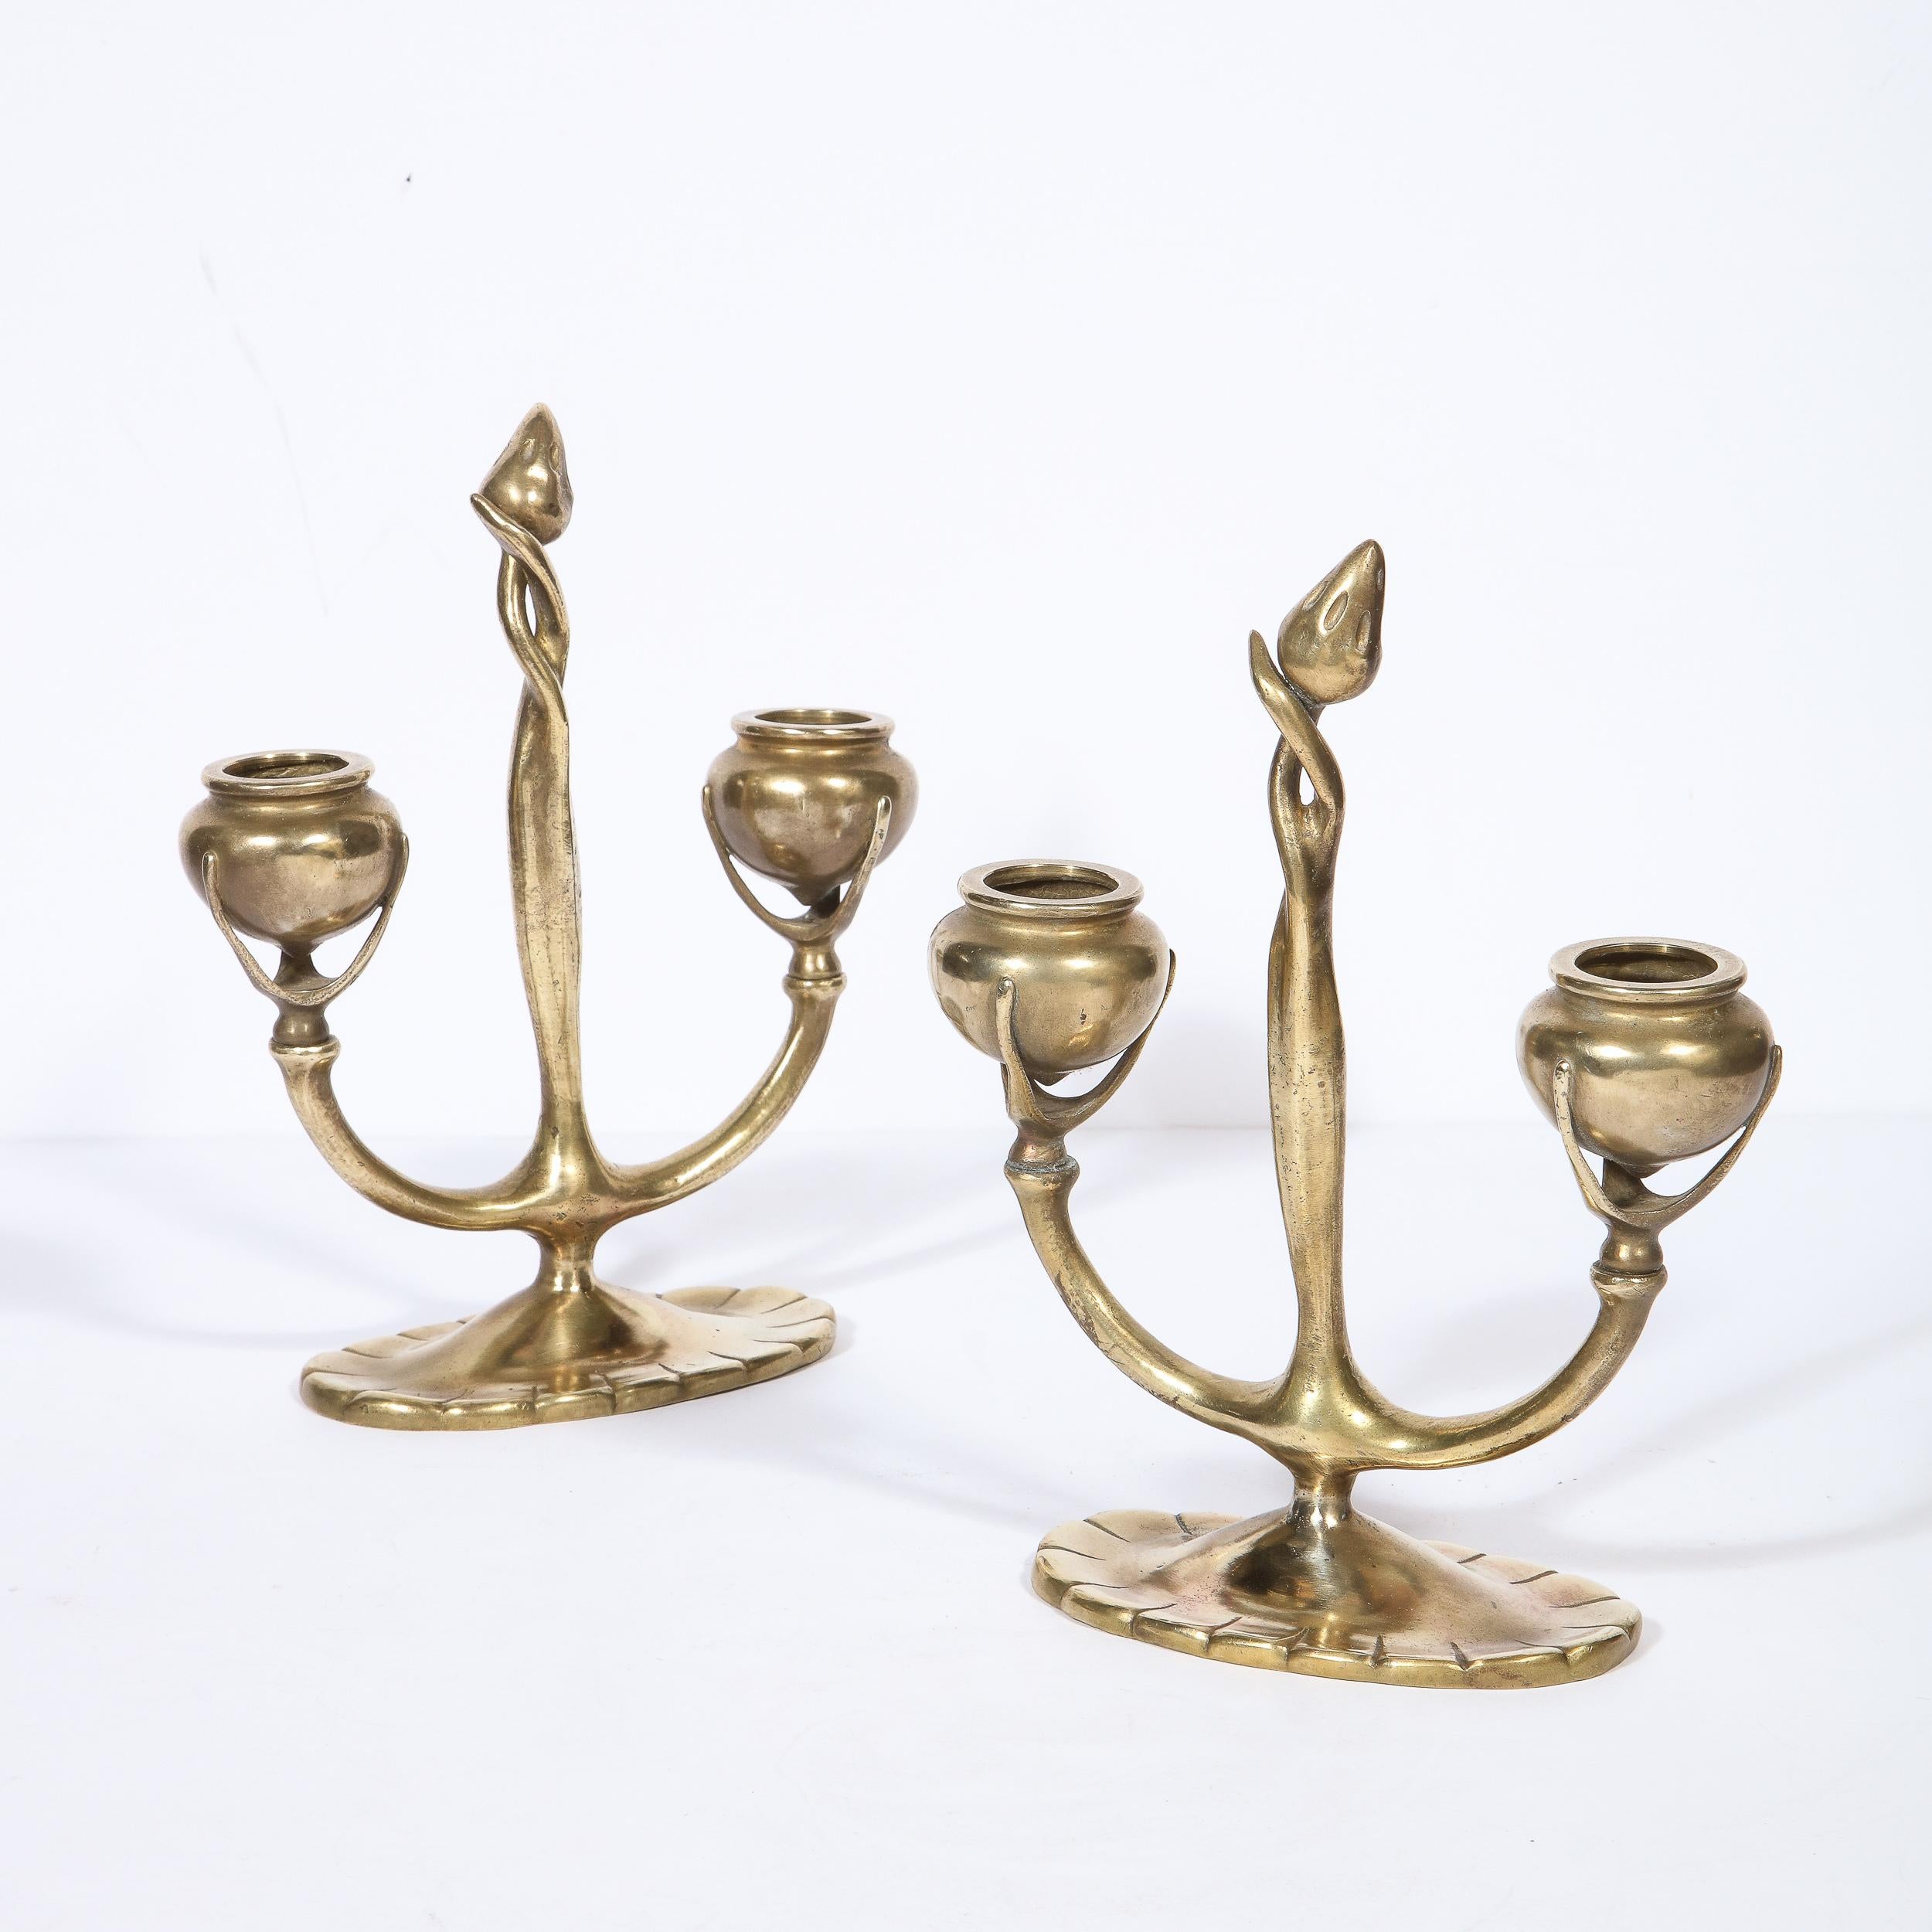 Pair of Art Nouveau Bronze Sculptural Floral Candelabras Signed Tiffany Studios In Excellent Condition For Sale In New York, NY